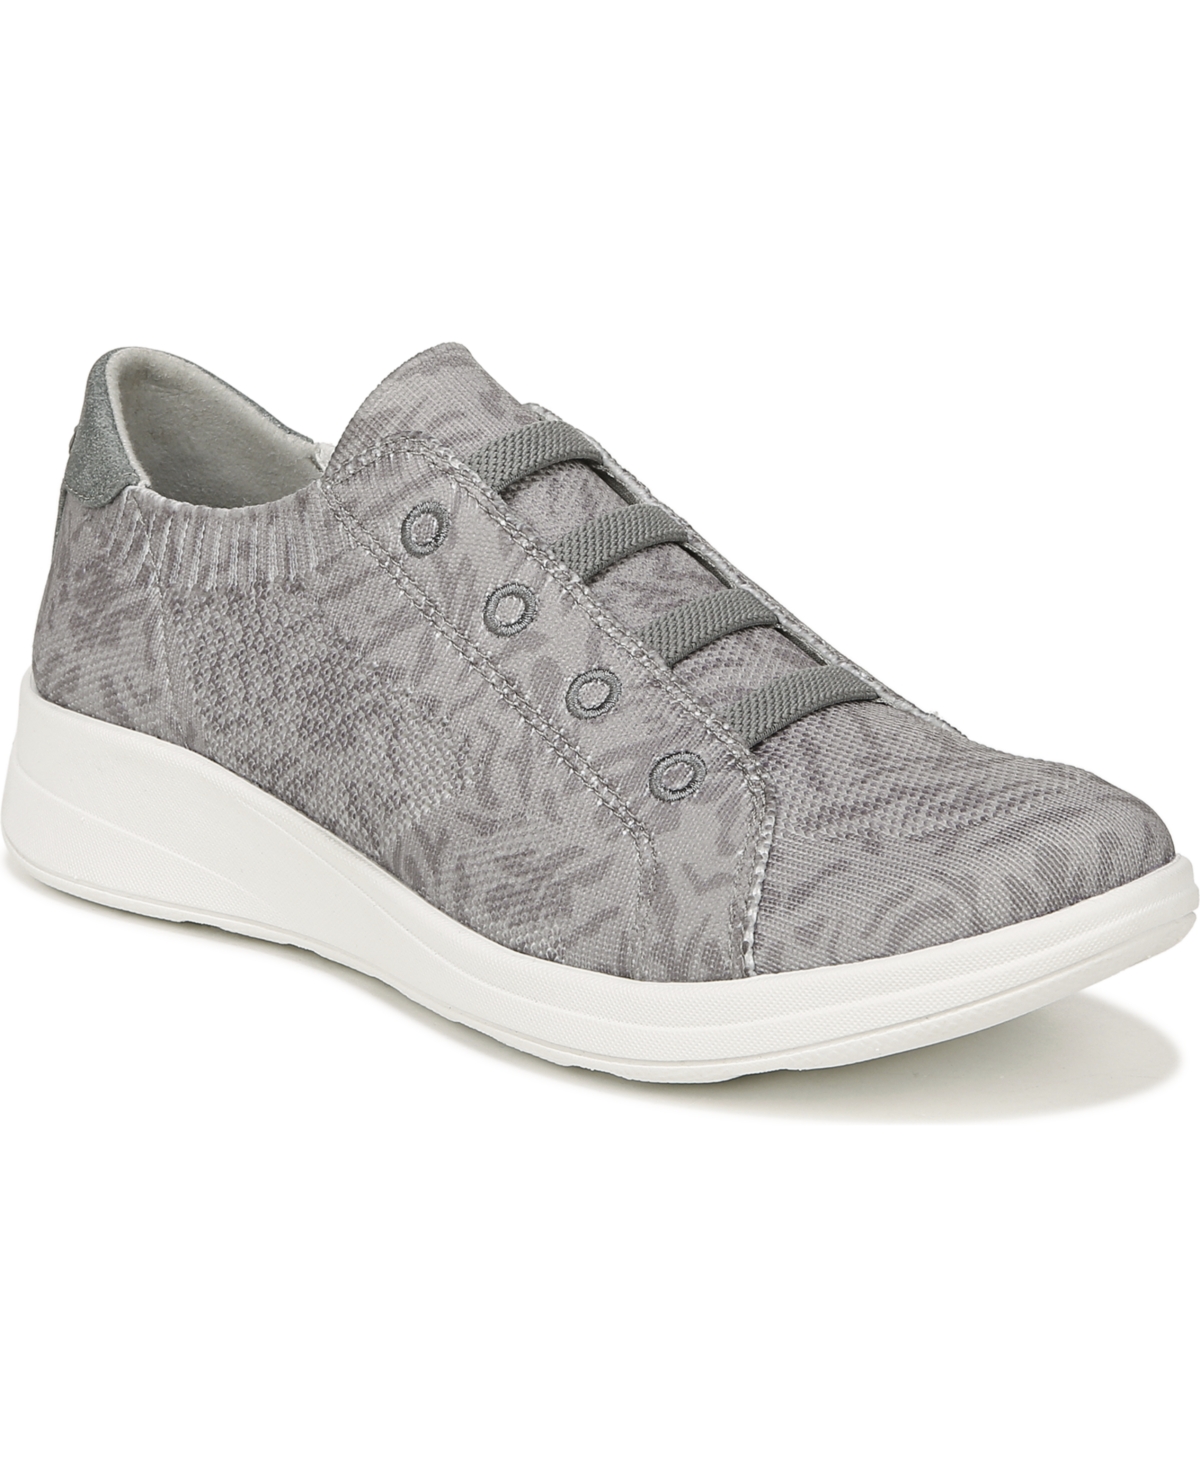 Golden Knit Washable Slip-on Sneakers - Grey Knit Fabric